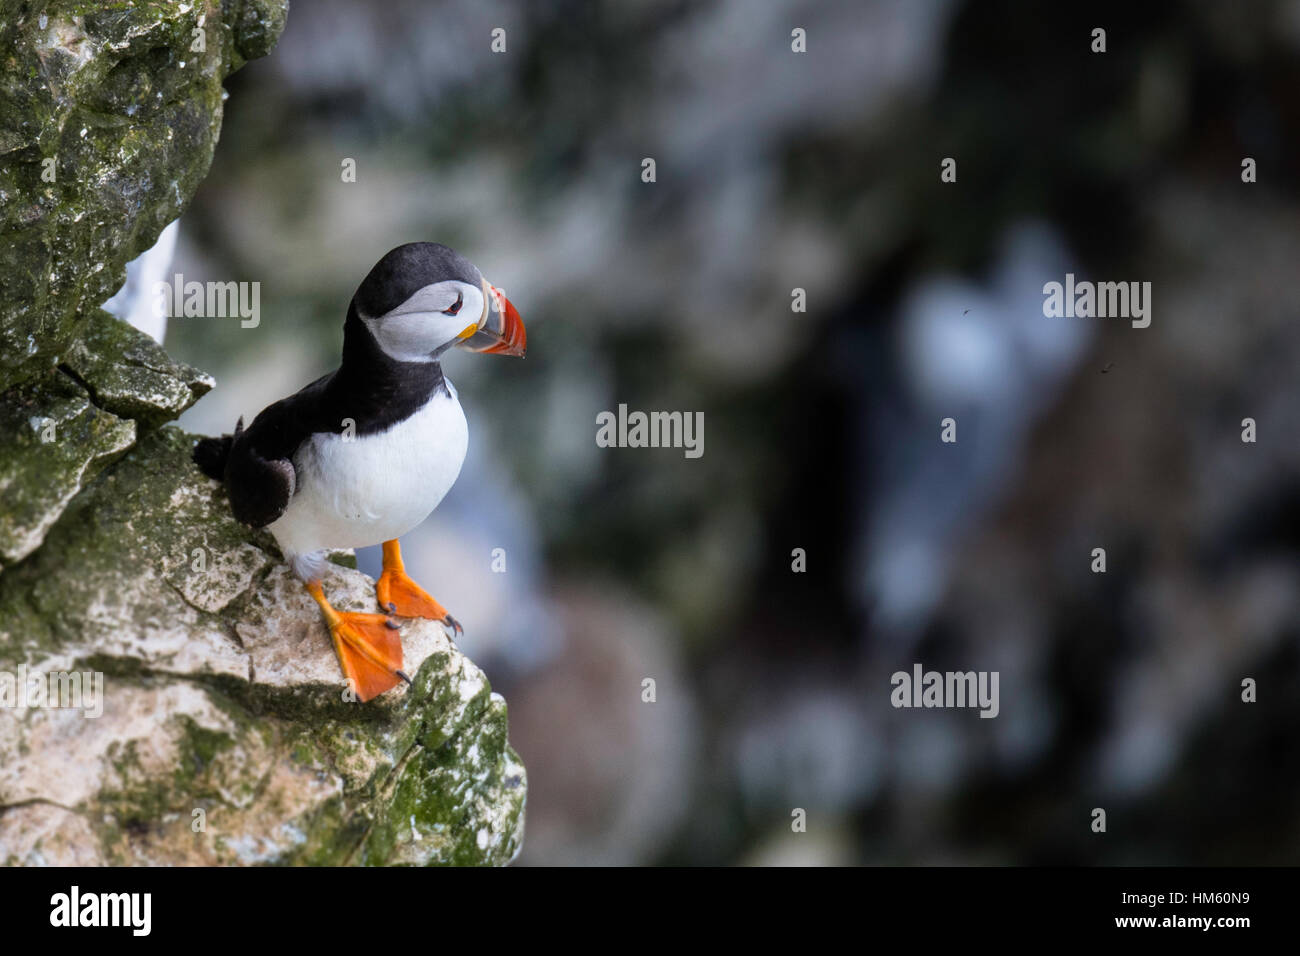 Atlantic Puffin, Fratercula arctica, on rocks at RSPB Bempton Cliffs, between Scarborough and Whitby, North Yorkshire, North Sea Stock Photo